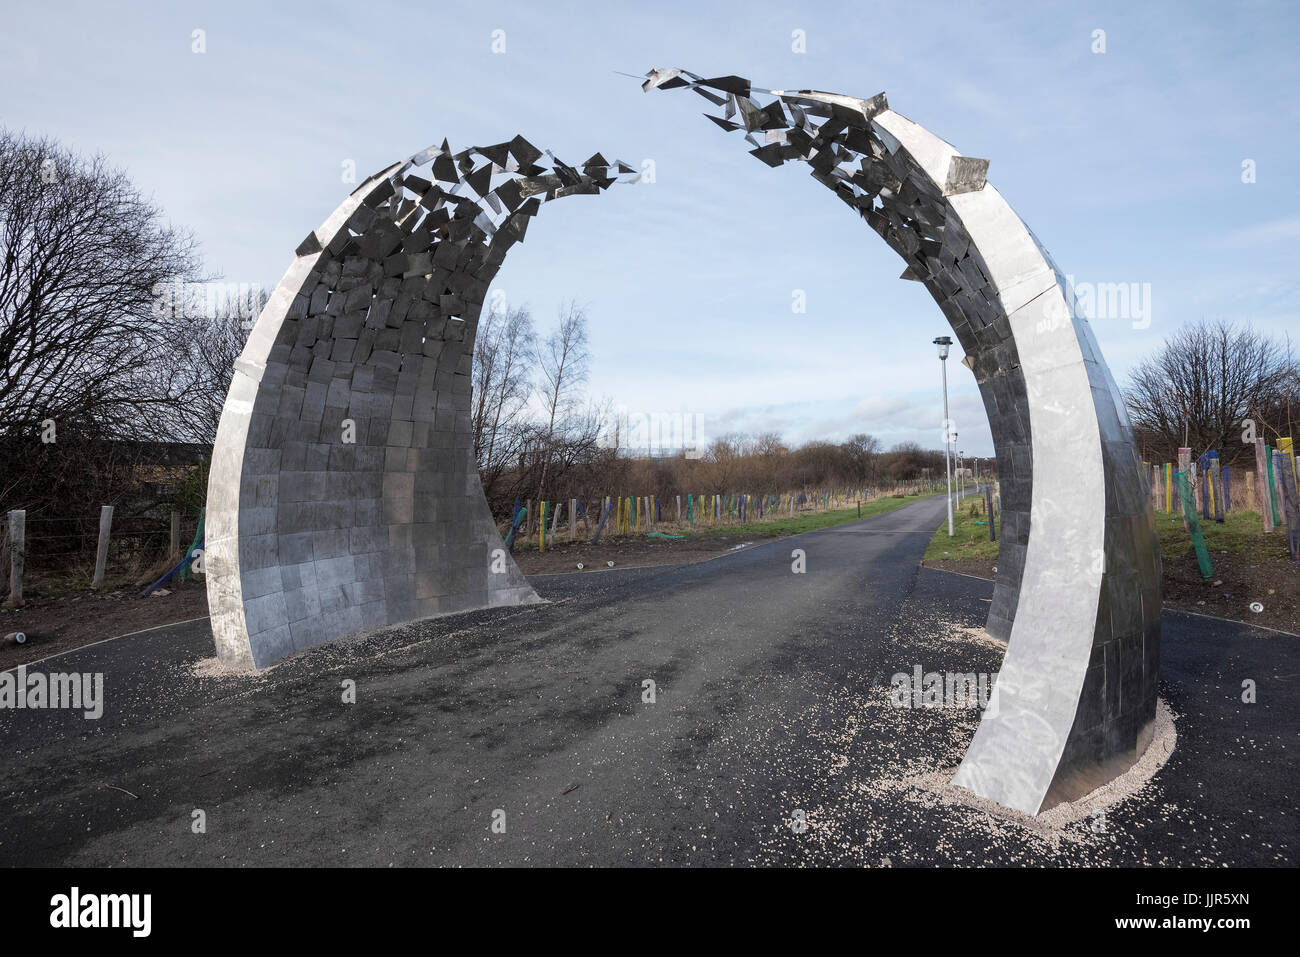 The 'Evolve' sculpture at the entrance to Cunningar Loop woodland park in Glasgow. Stock Photo